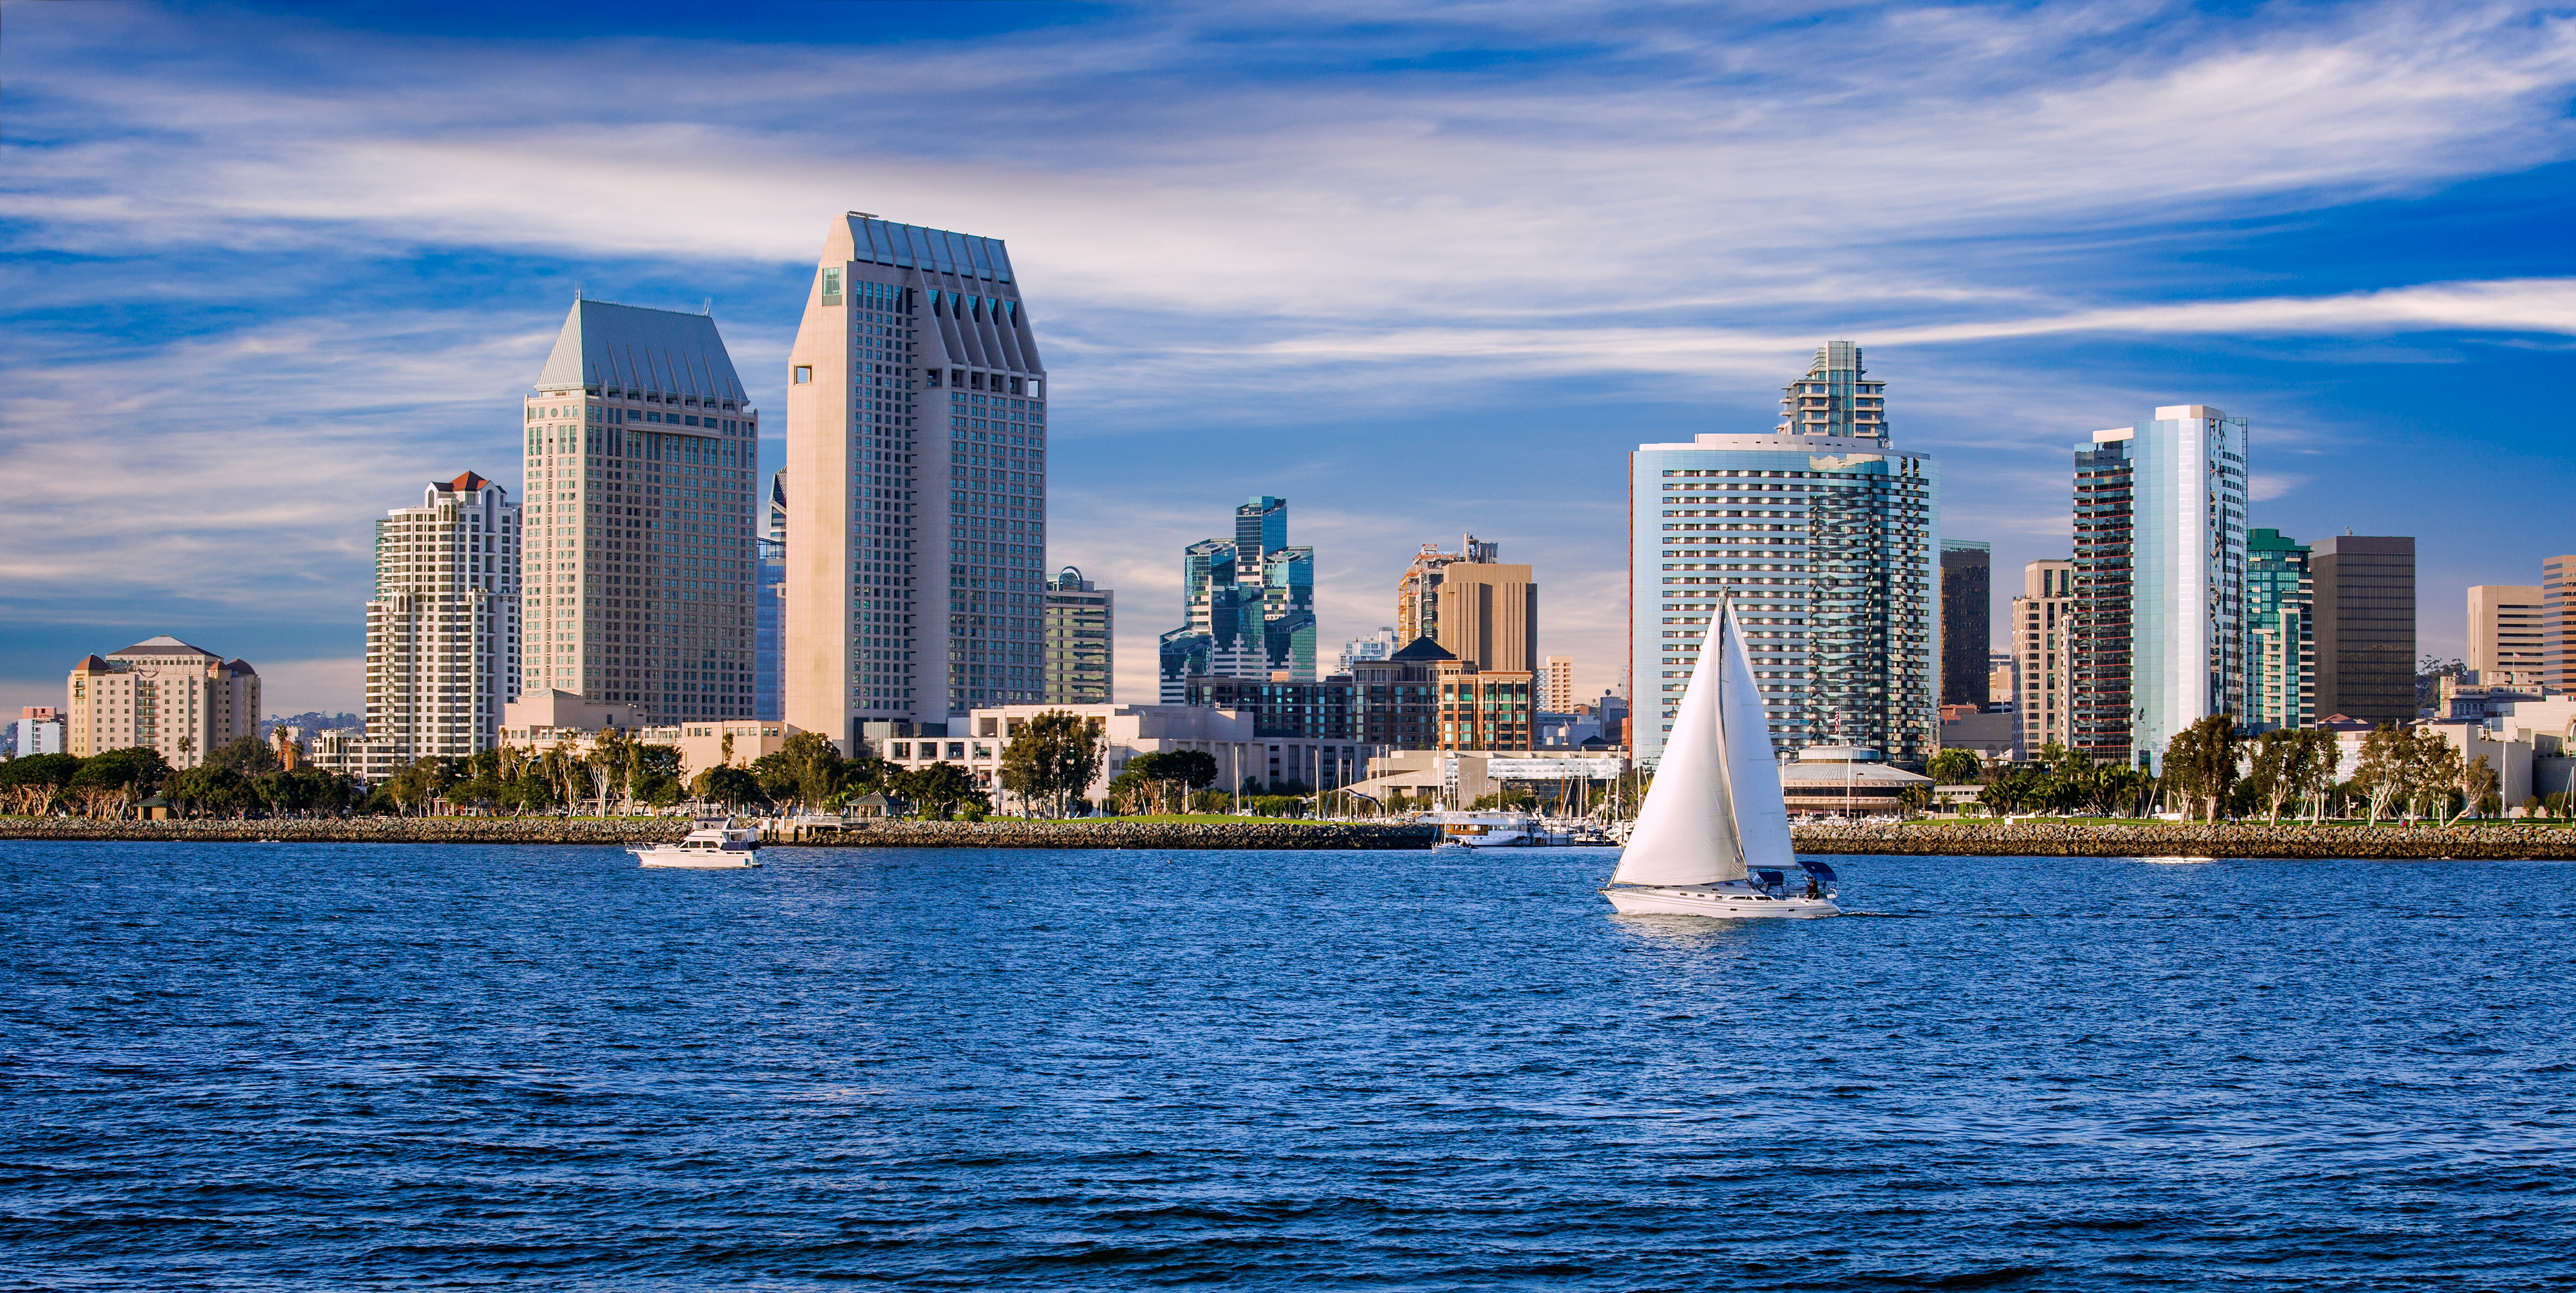 A sailboat in water in from of the buildings that make up the downtown San Diego skyline.